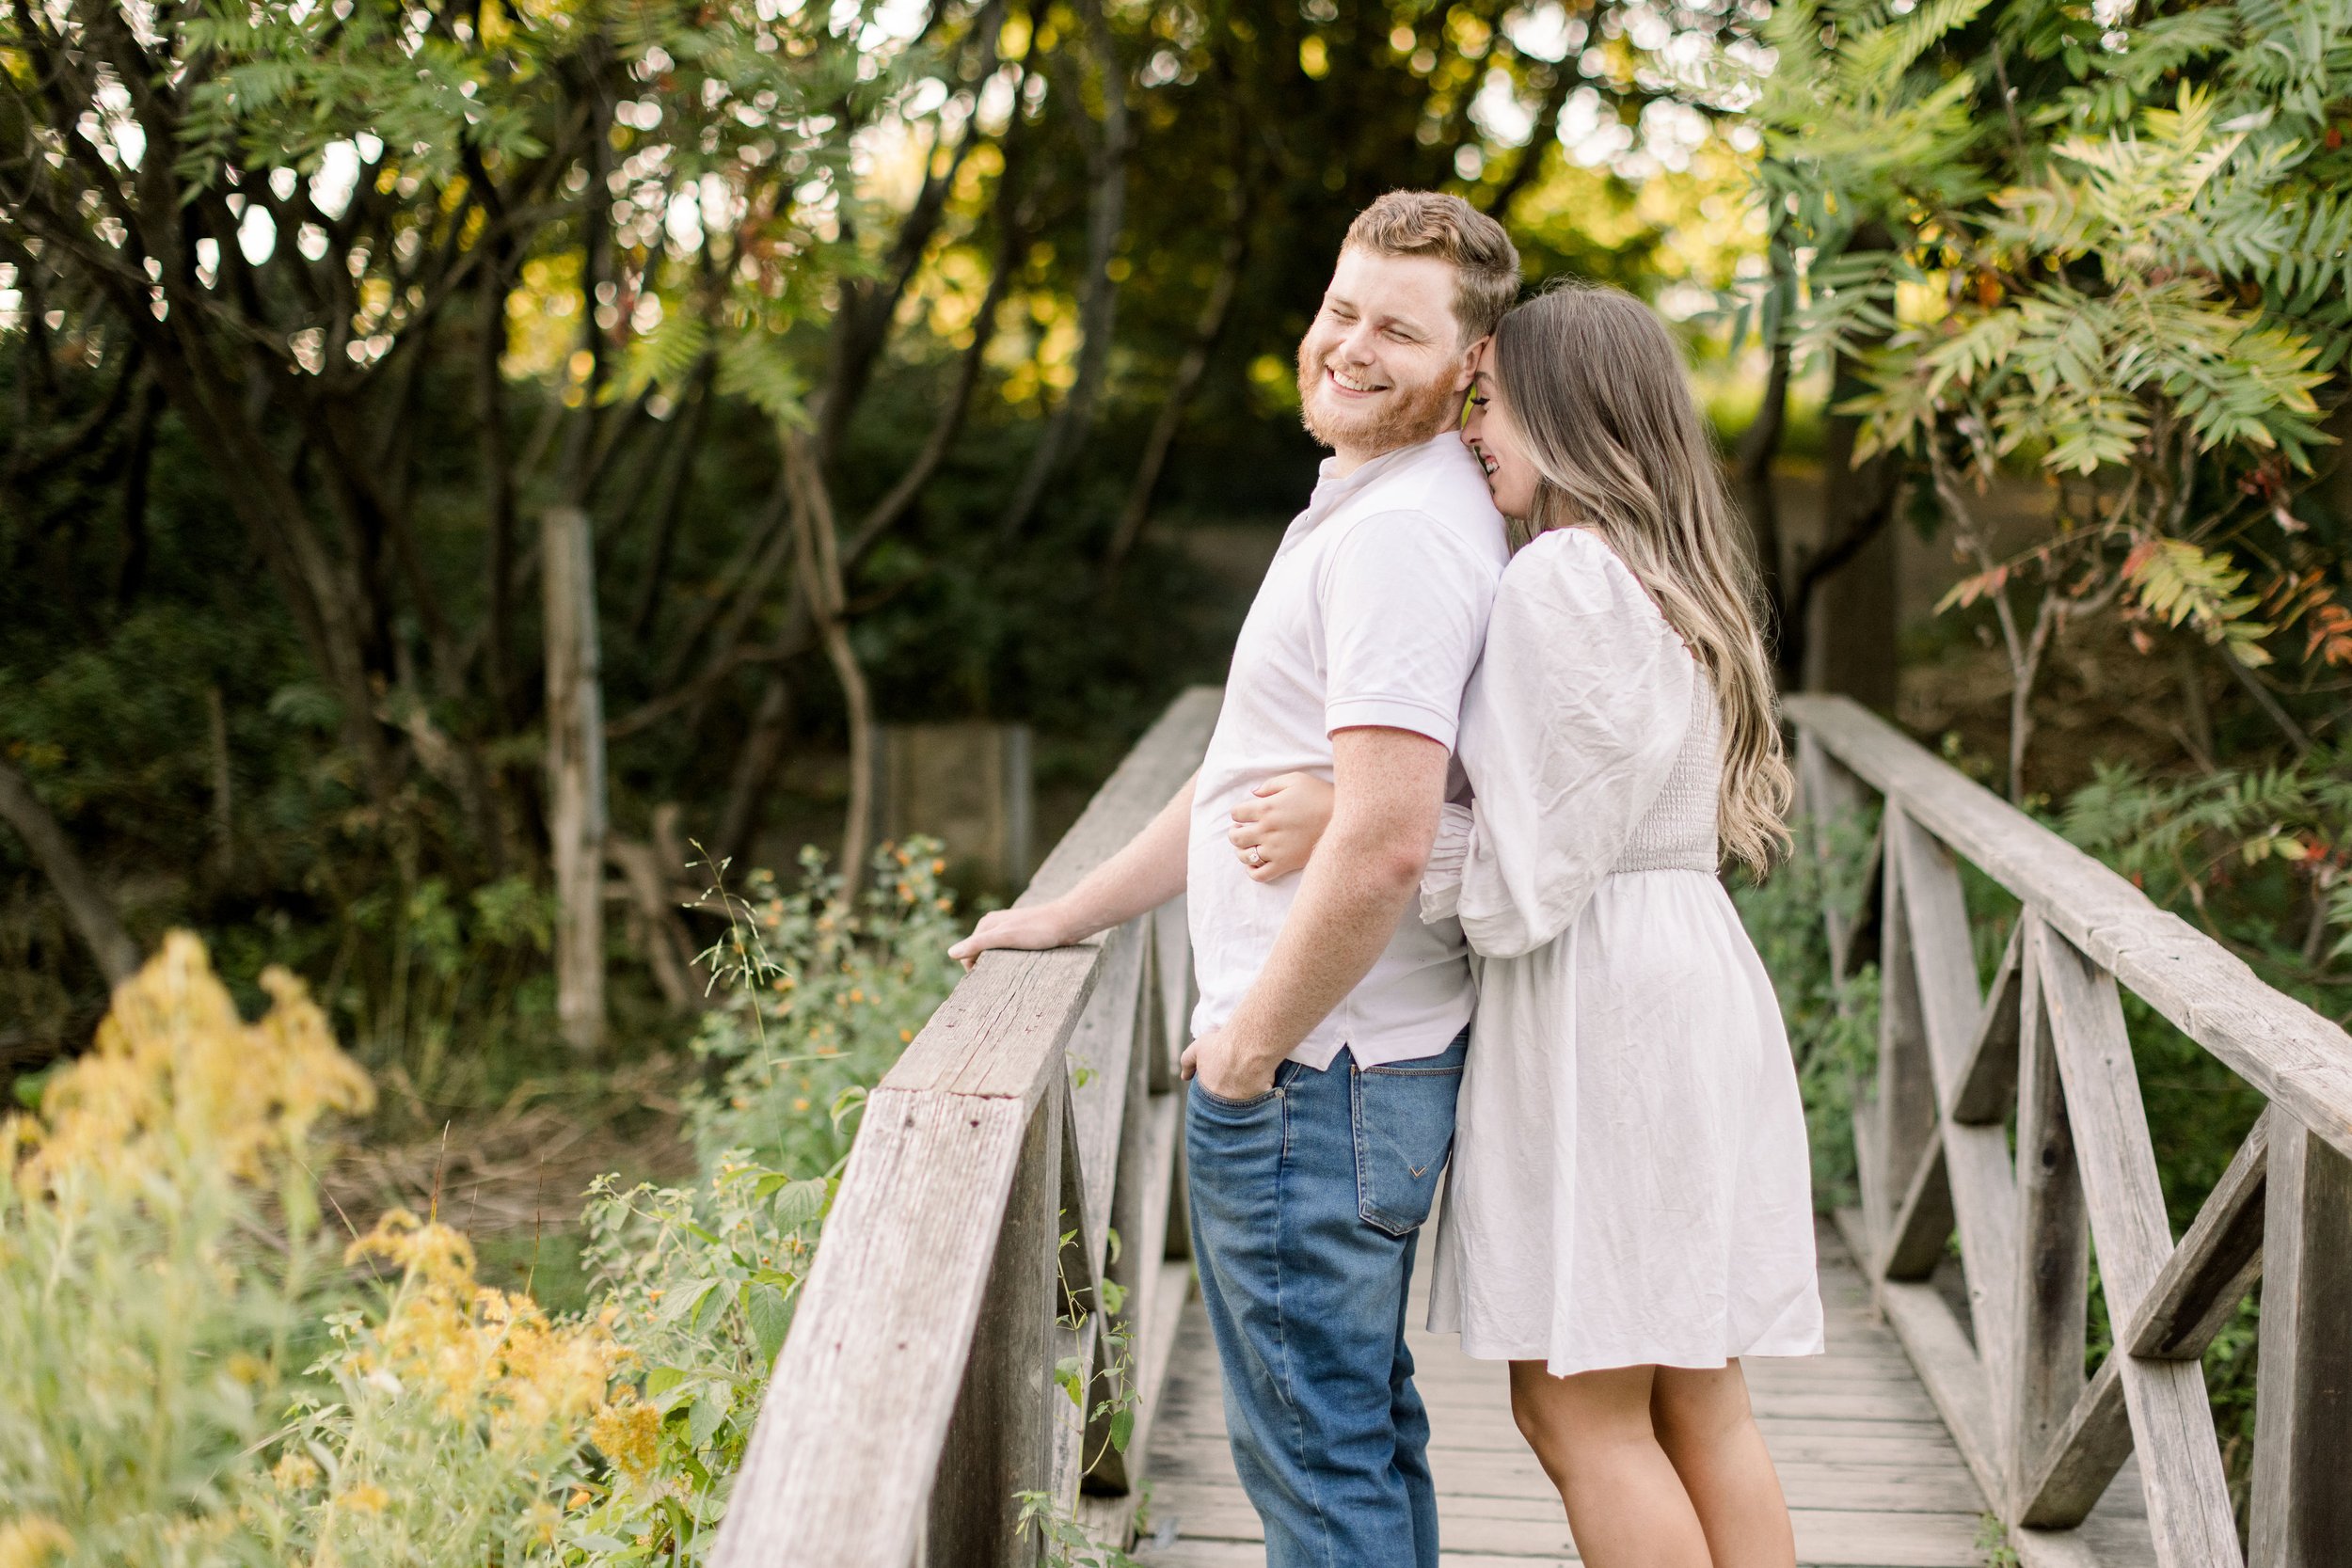  A woman hugs her boyfriend from behind and snuggles in by Chelsea Mason Photography. engagement poses #ChelseaMasonPhotography #ChelseaMasonEngagements #Ottawaphotographers #ArboretumOttawaEngagments #weddingannouncementportraits 